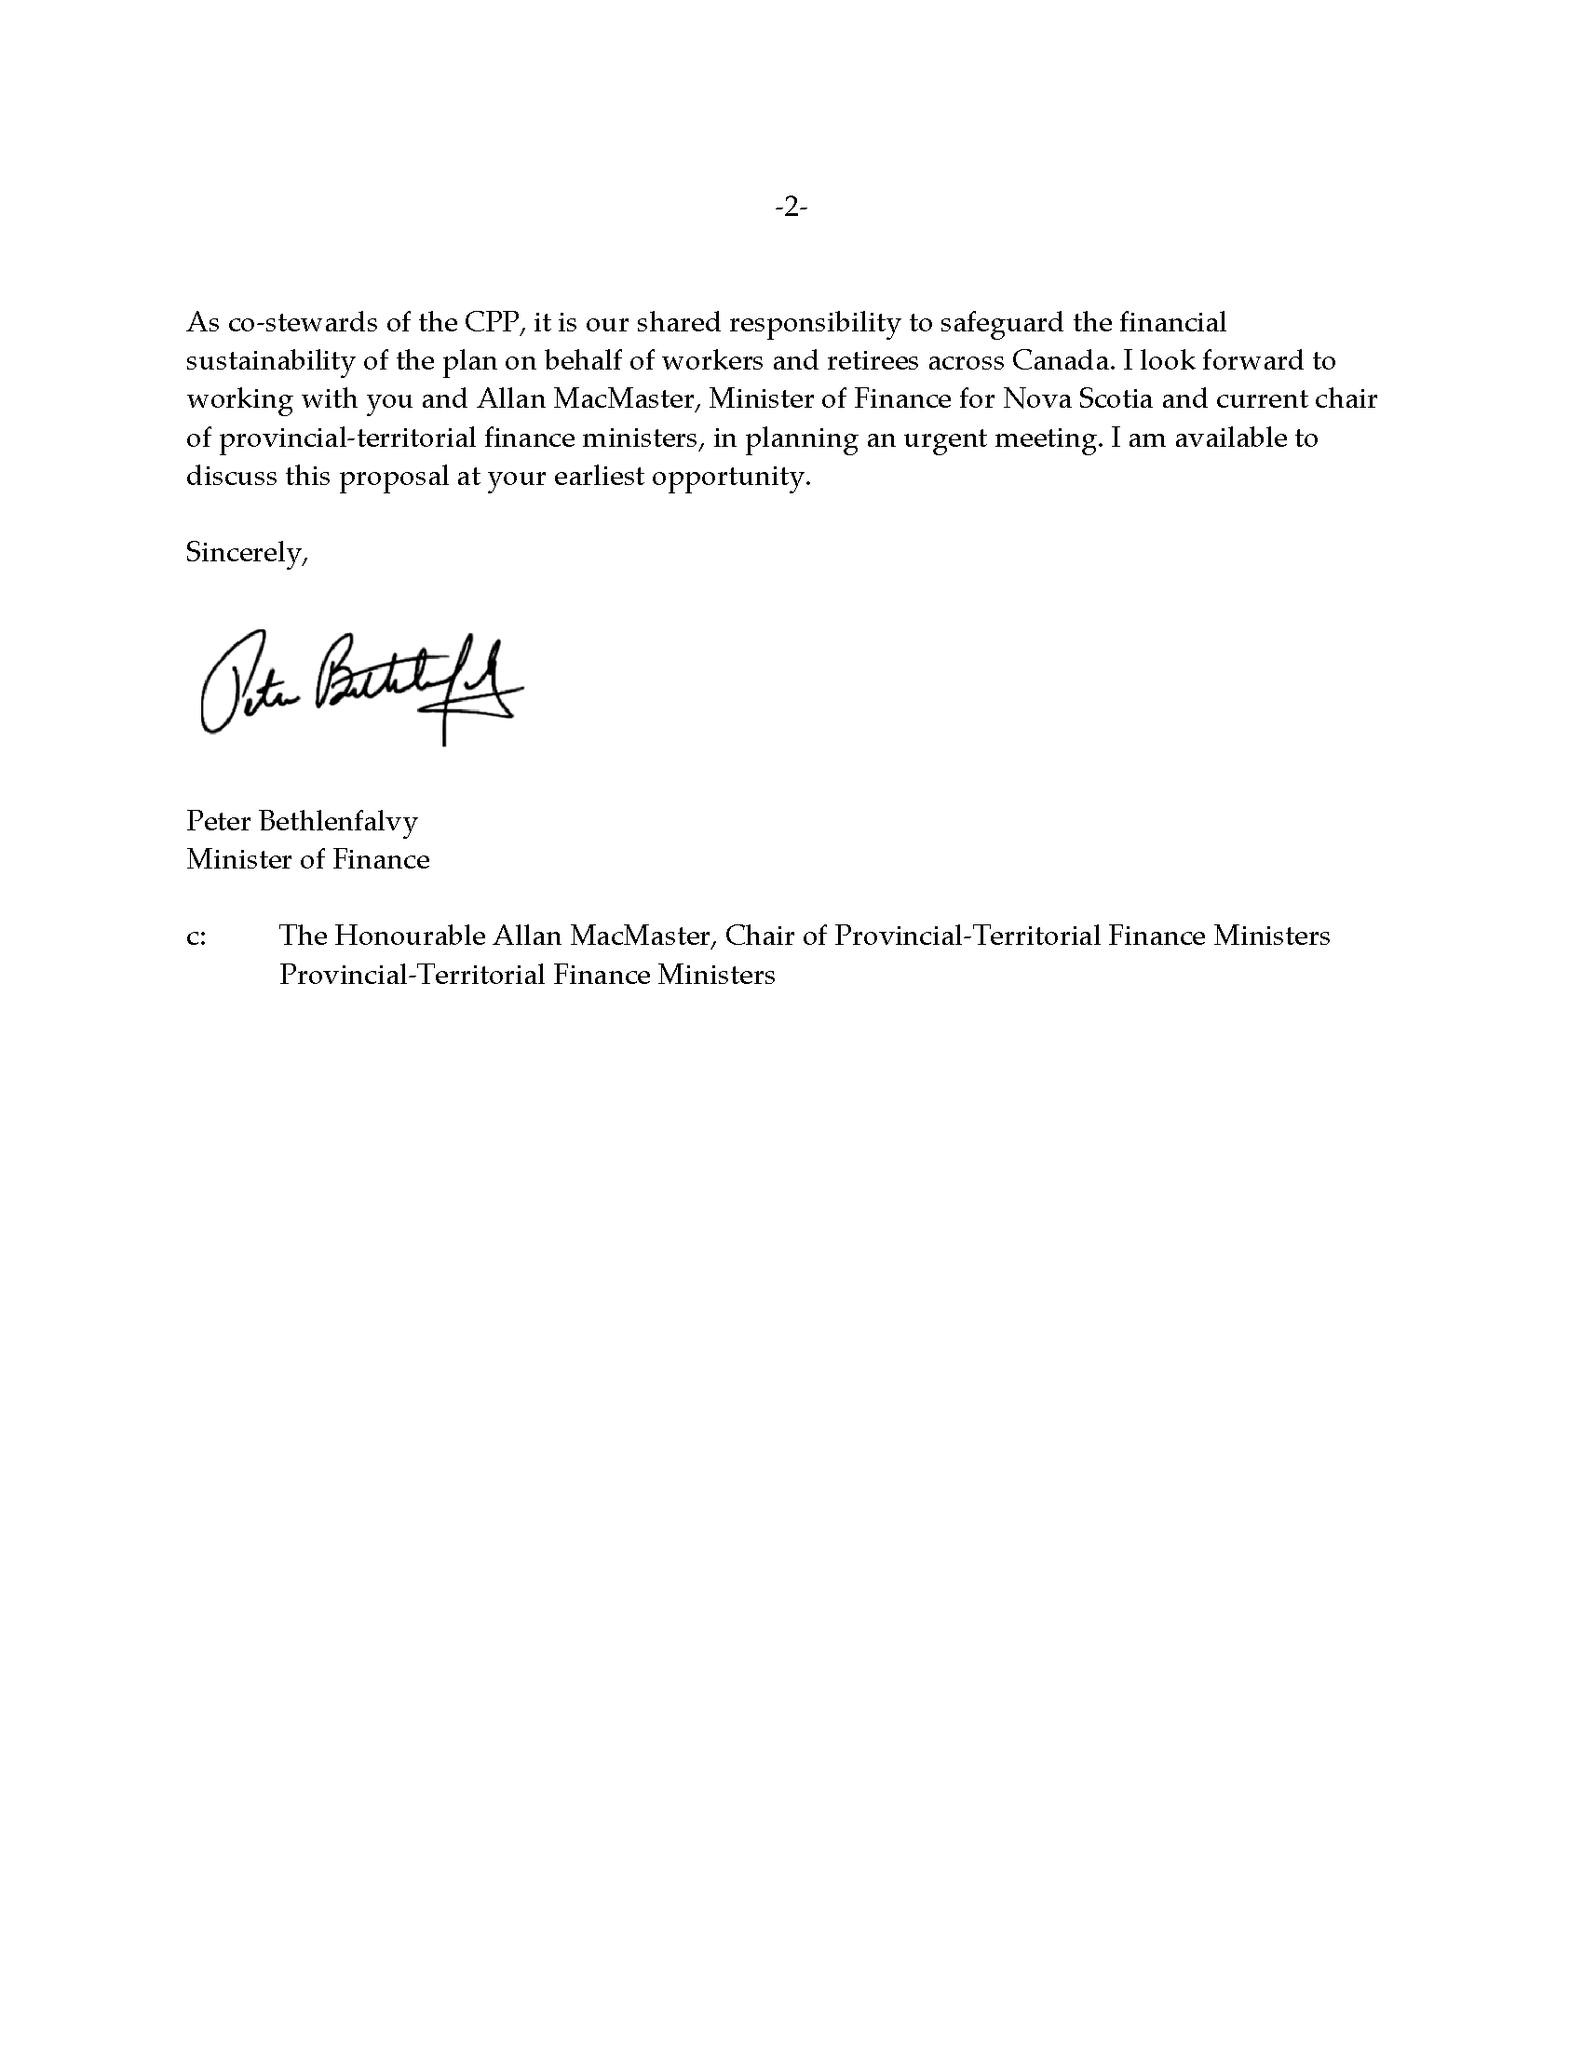 MoF letter re CPP_Page_2